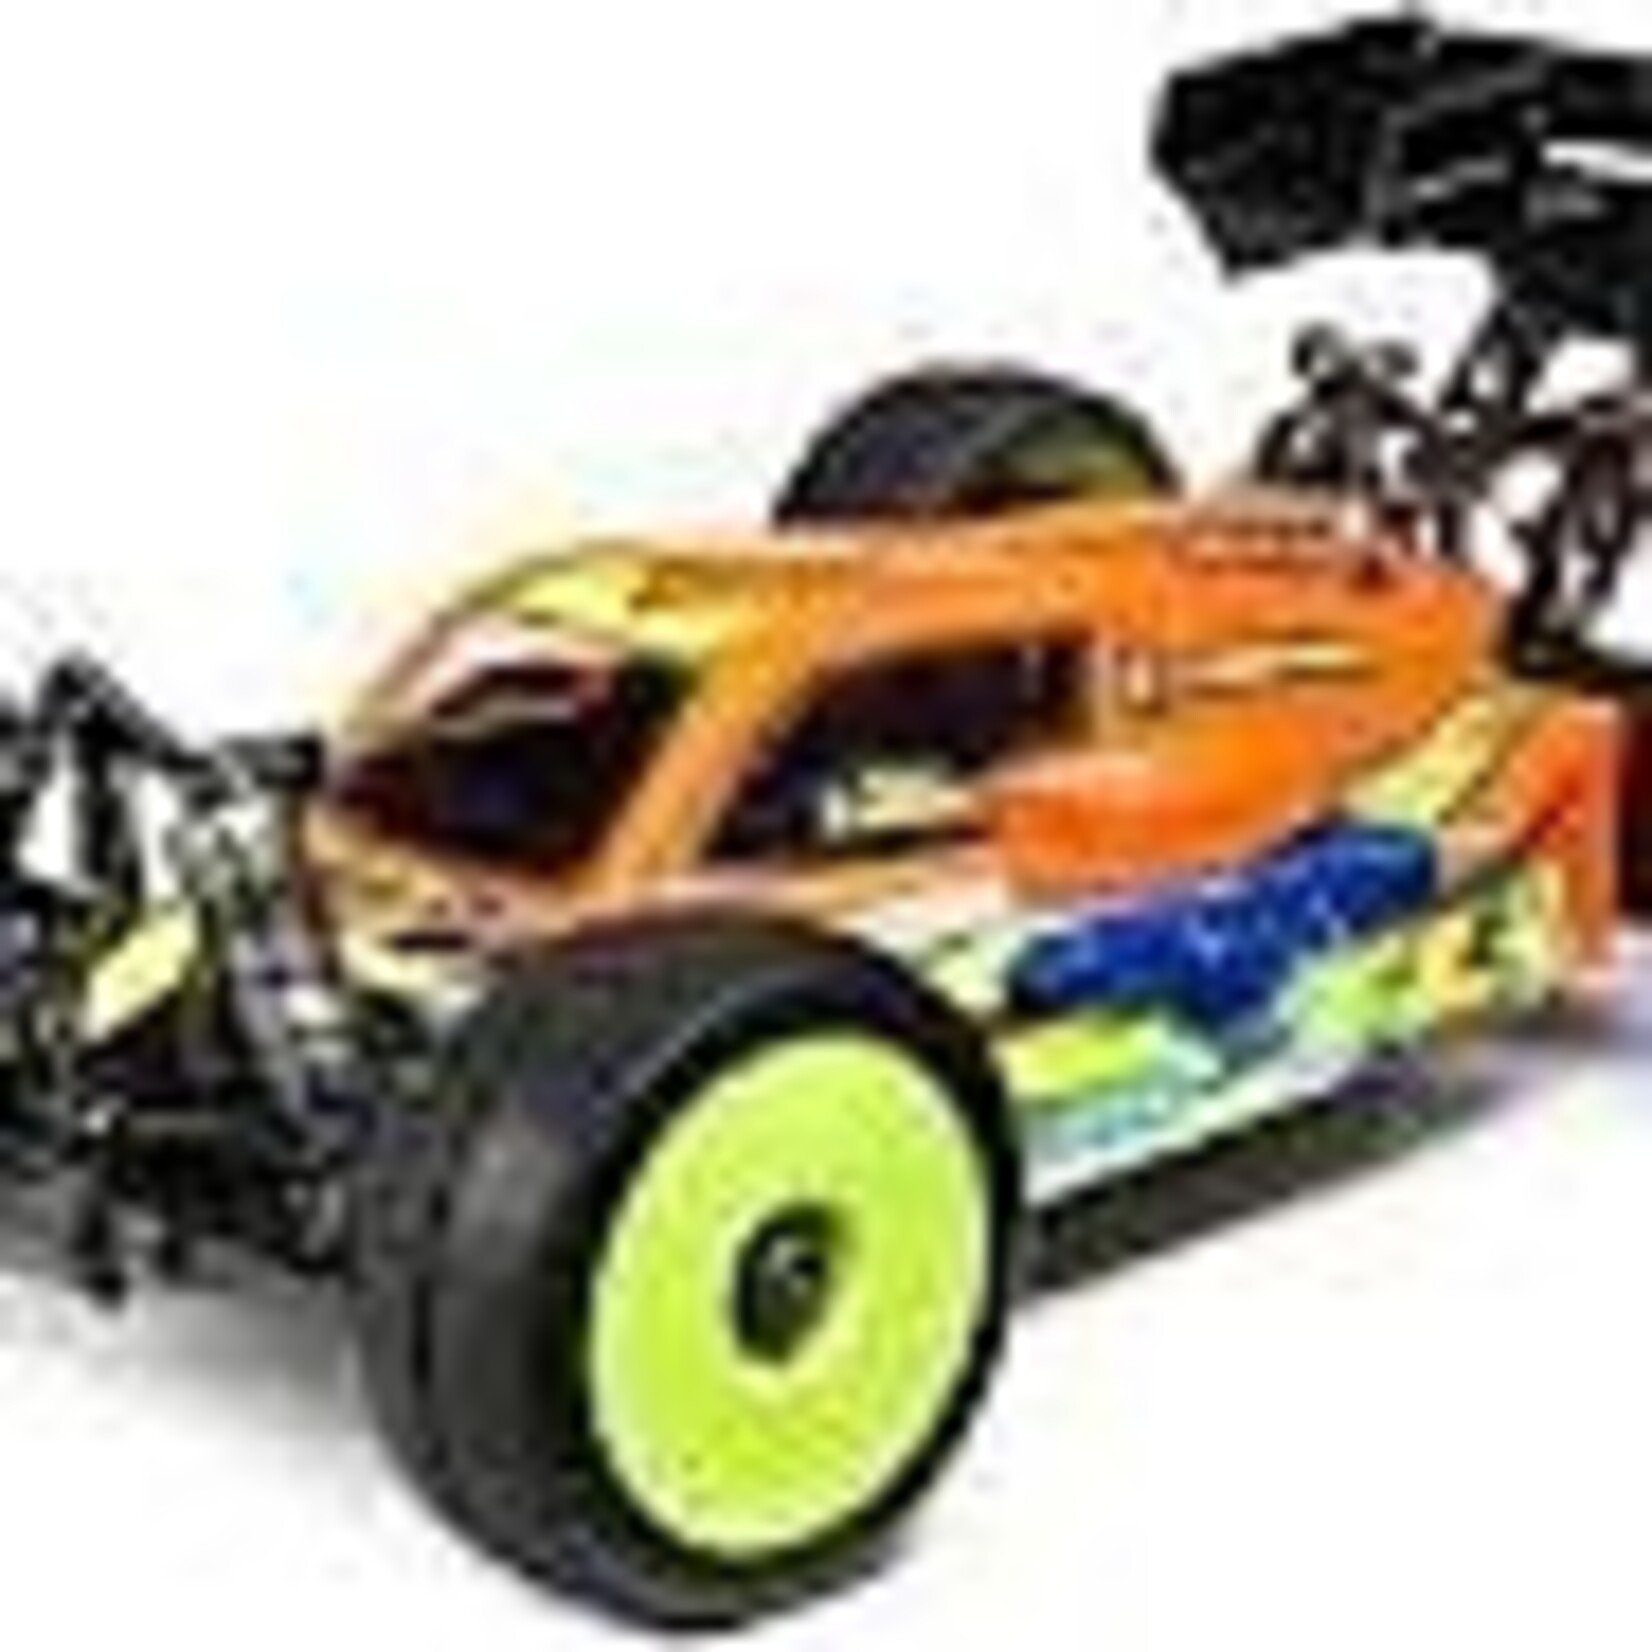 TLR (Team Losi Racing) TLR04011  1/8 8IGHT-XE Elite 4WD Electric Buggy Race Kit